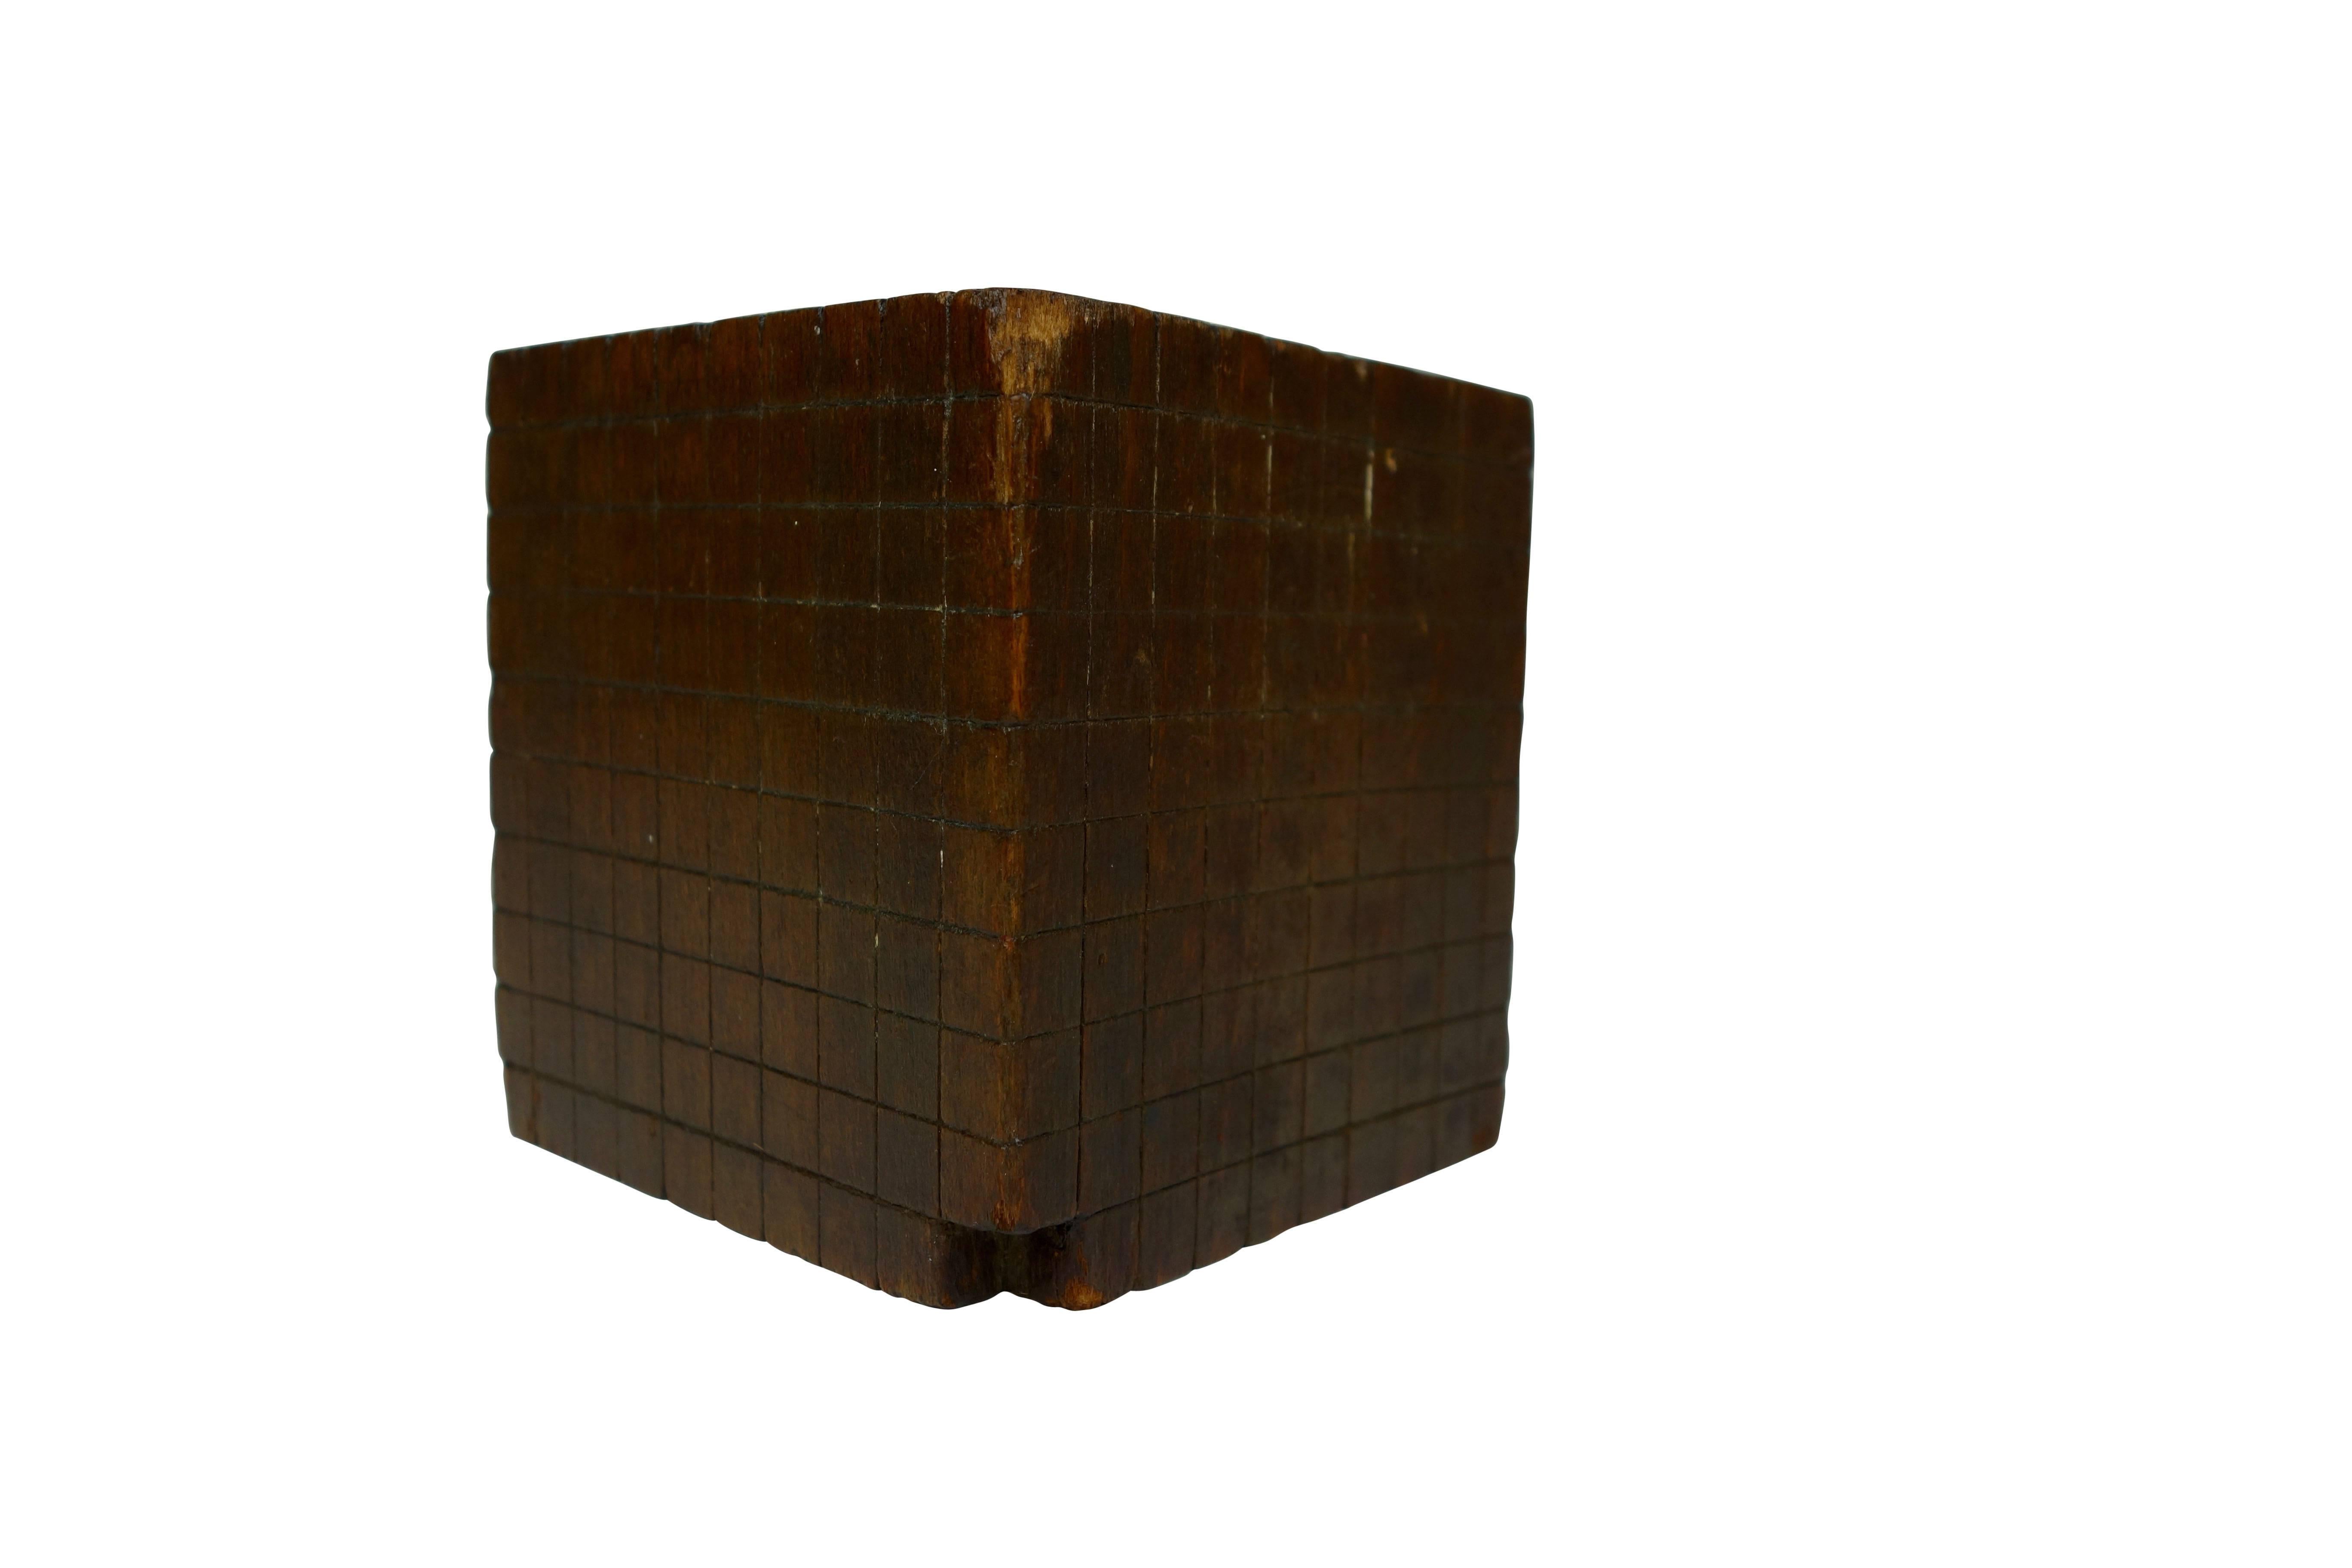 This is an early hand-carved wood "base ten" cube mathematical education model.